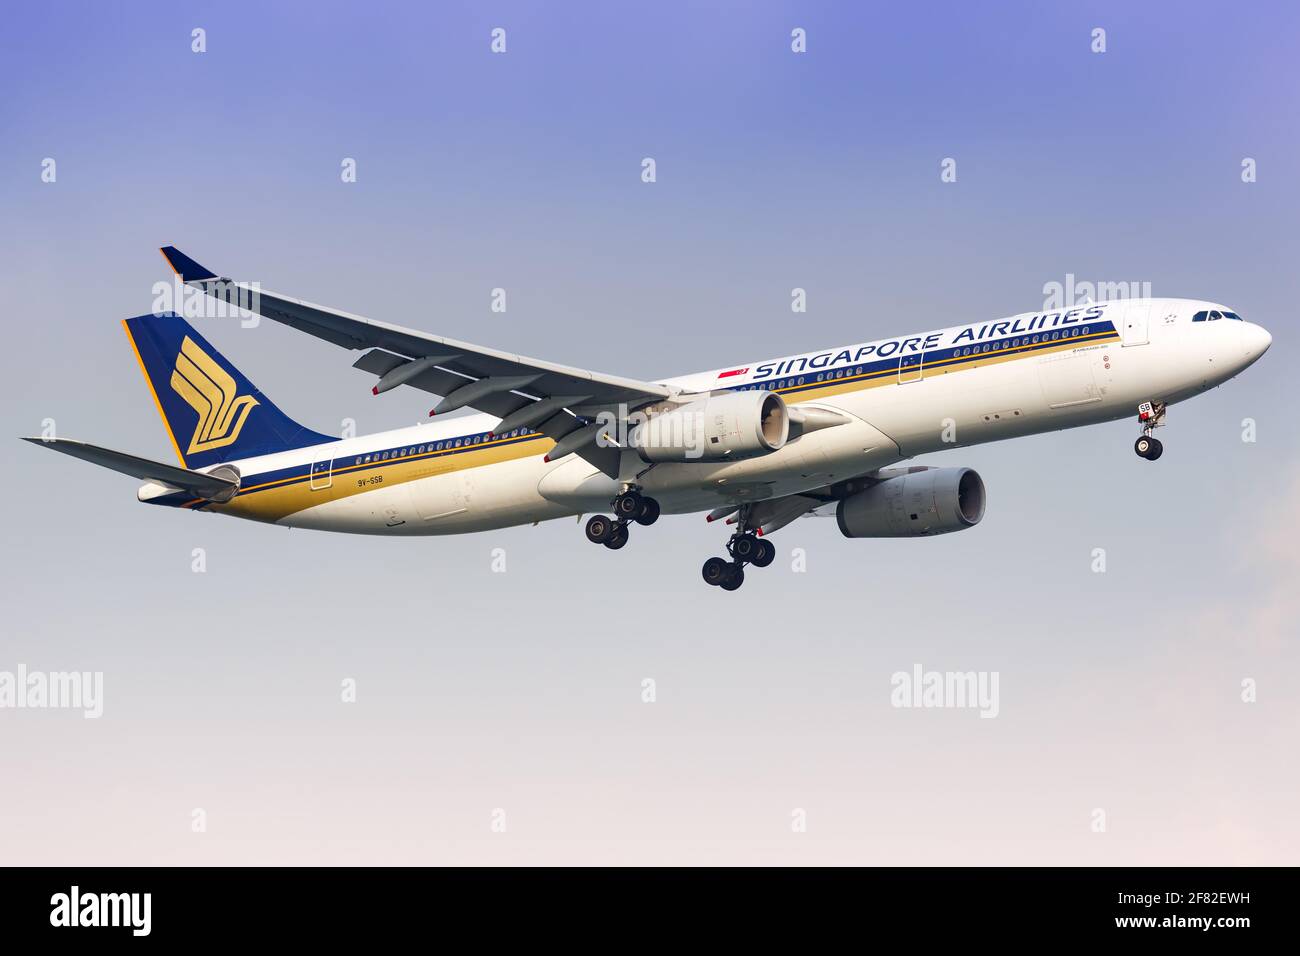 Changi, Singapore – January 29, 2018: Singapore Airlines Airbus A330 airplane at Changi airport (SIN) in Singapore. Airbus is a European aircraft manu Stock Photo